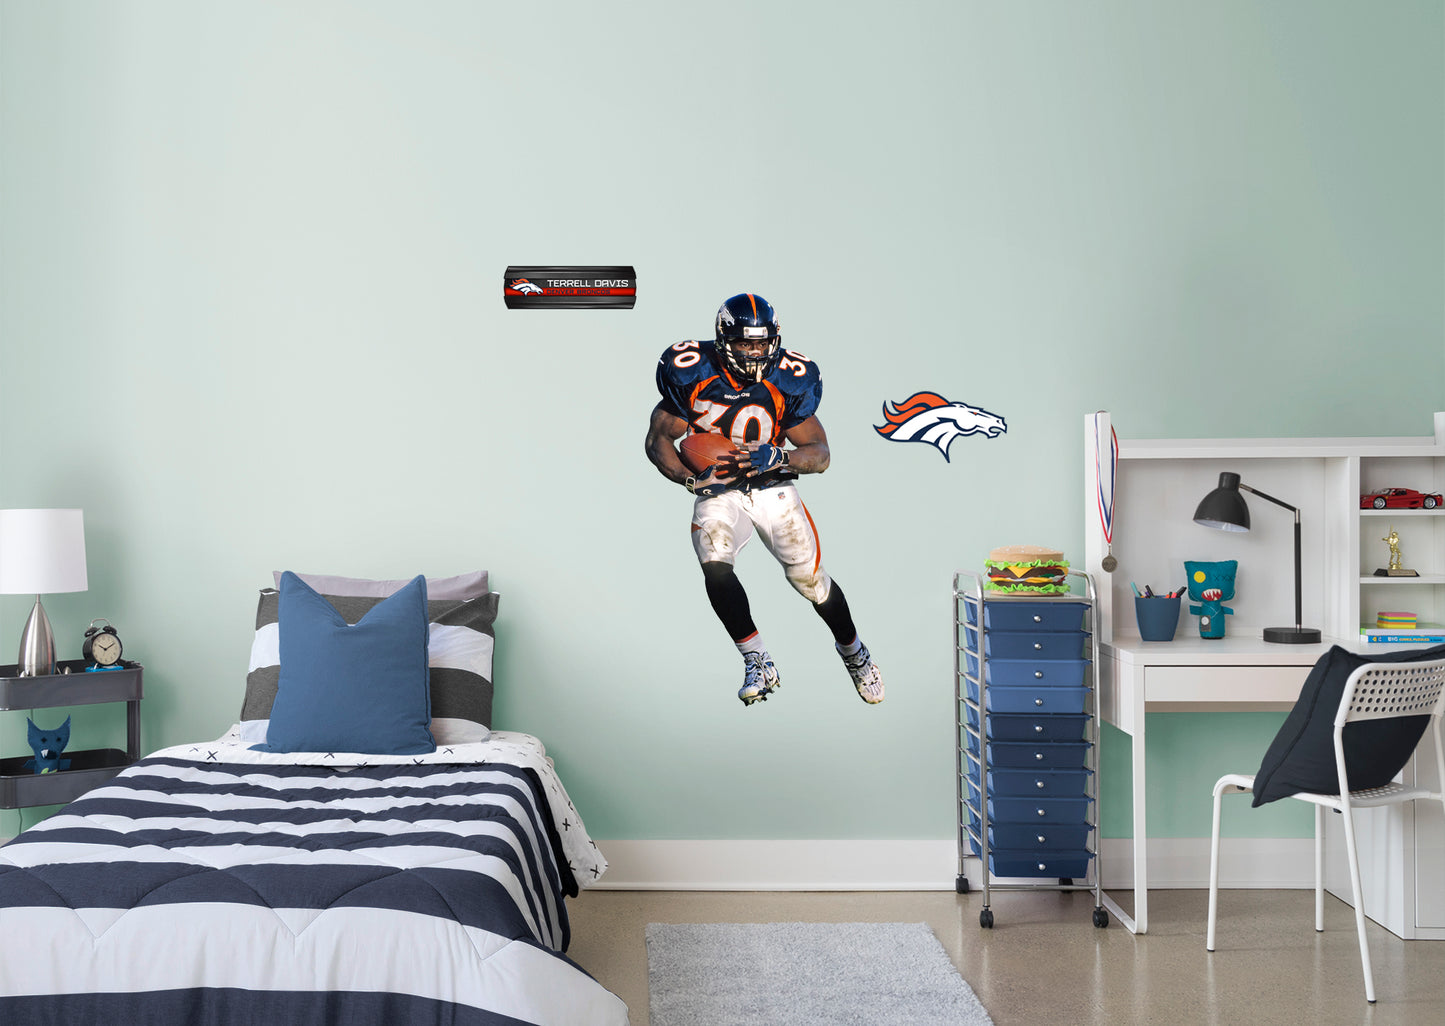 Denver Broncos: Terrell Davis  Legend        - Officially Licensed NFL Removable Wall   Adhesive Decal